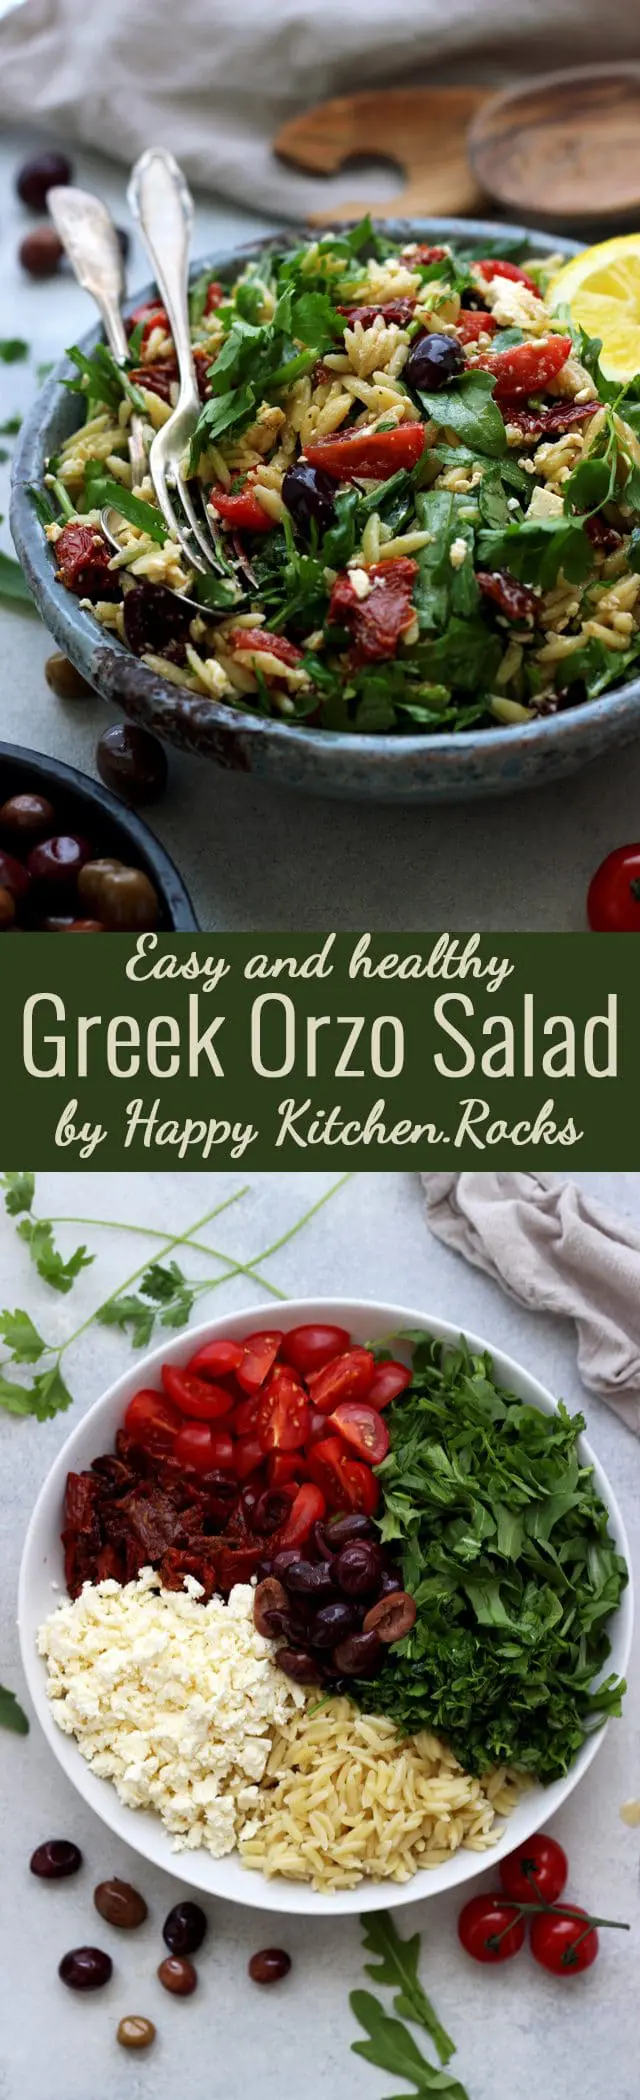 This easy Greek Orzo Salad is perfect for picnics, potlucks, BBQ and get togethers. Whenever you need an easy and healthy side dish, that is guaranteed to disappear first, make this gorgeous Greek orzo salad! #pastasalad #orzo #sidedish #bbq #Greekfood #Mediterraneanfood #pasta #salad #summersalad #summerveggies #healthyrecipes #orzopastasalad #pastasaladrecipe #saladrecipes #recipe